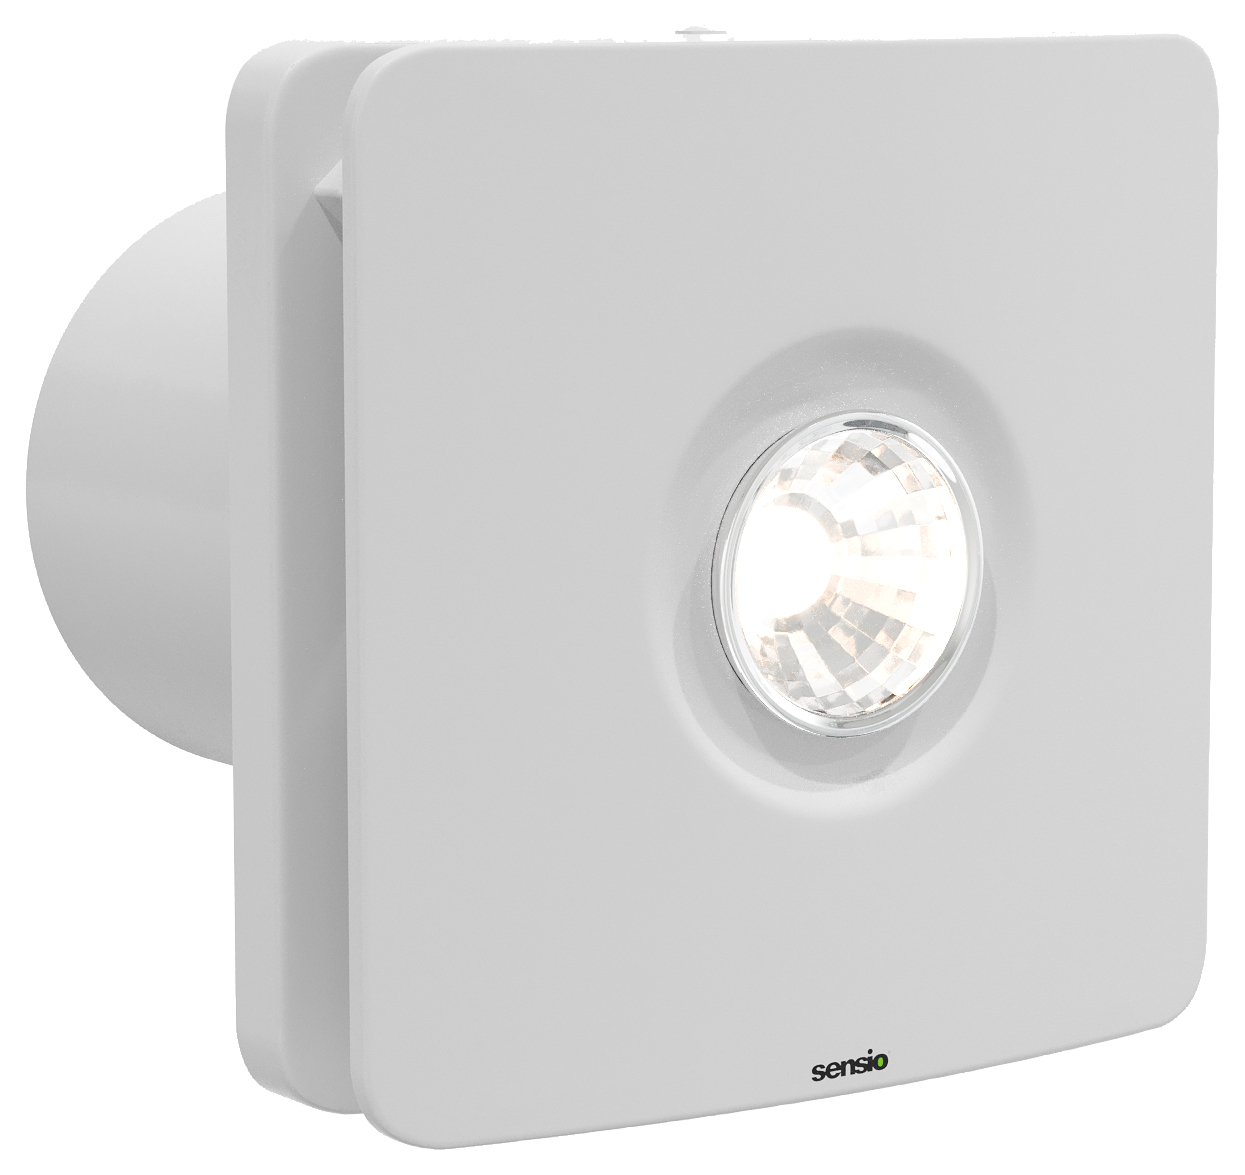 Sensio Remy White Wall Ventilation Fan with Aquilo Ventilation Ducting Kit - 100mm